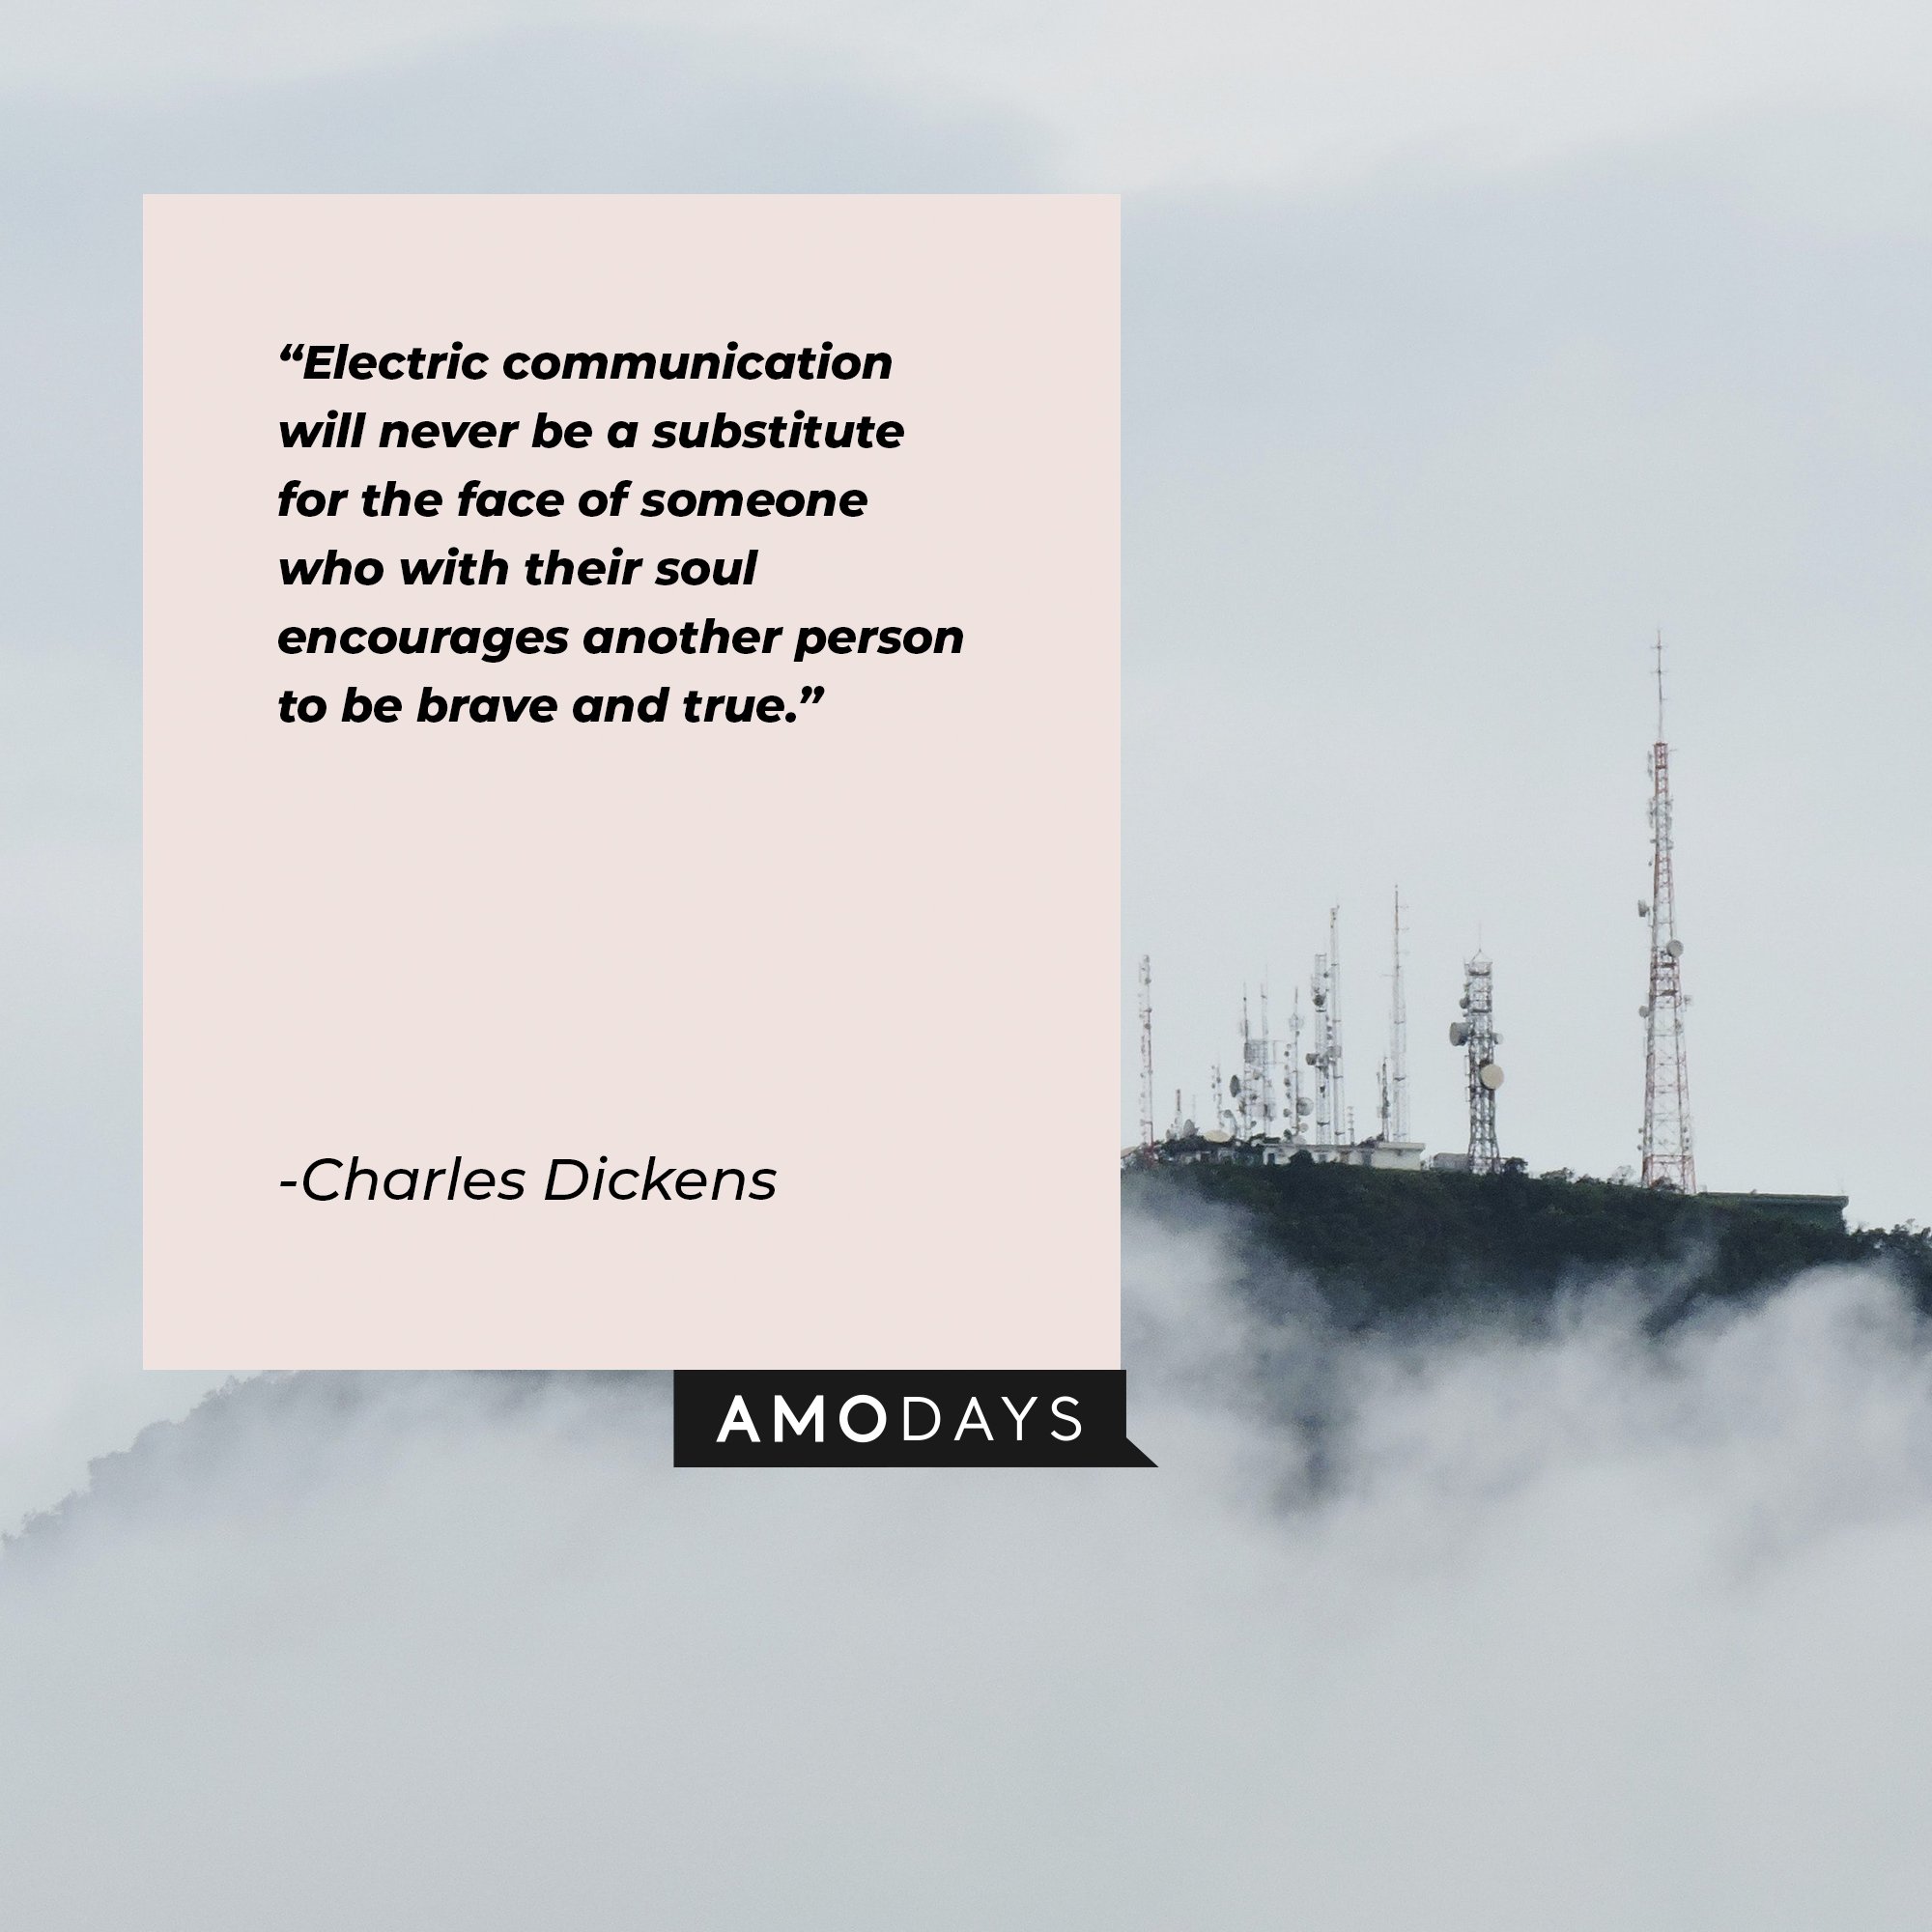 Charles Dickens' quote: “Electric communication will never be a substitute for the face of someone who with their soul encourages another person to be brave and true.” | Image: AmoDays